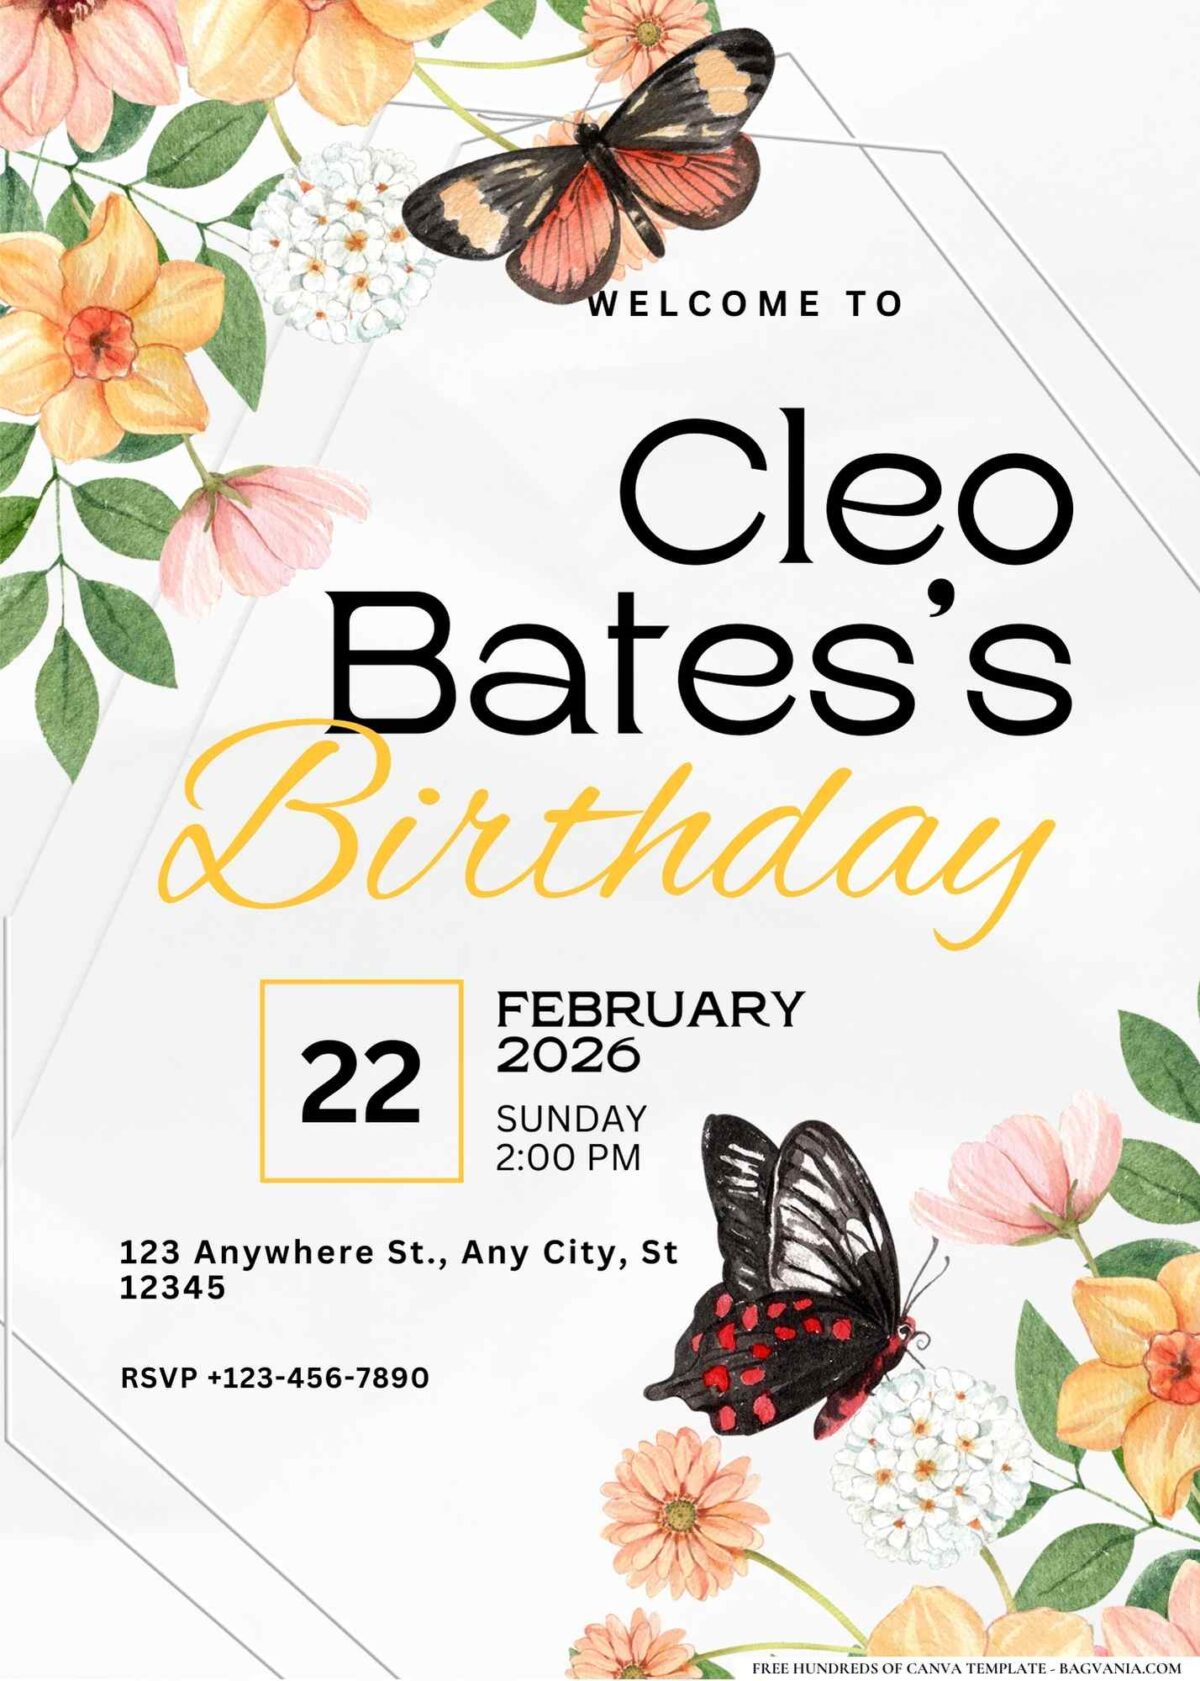 FREE Editable Butterfly and Flower Birthday Invitation